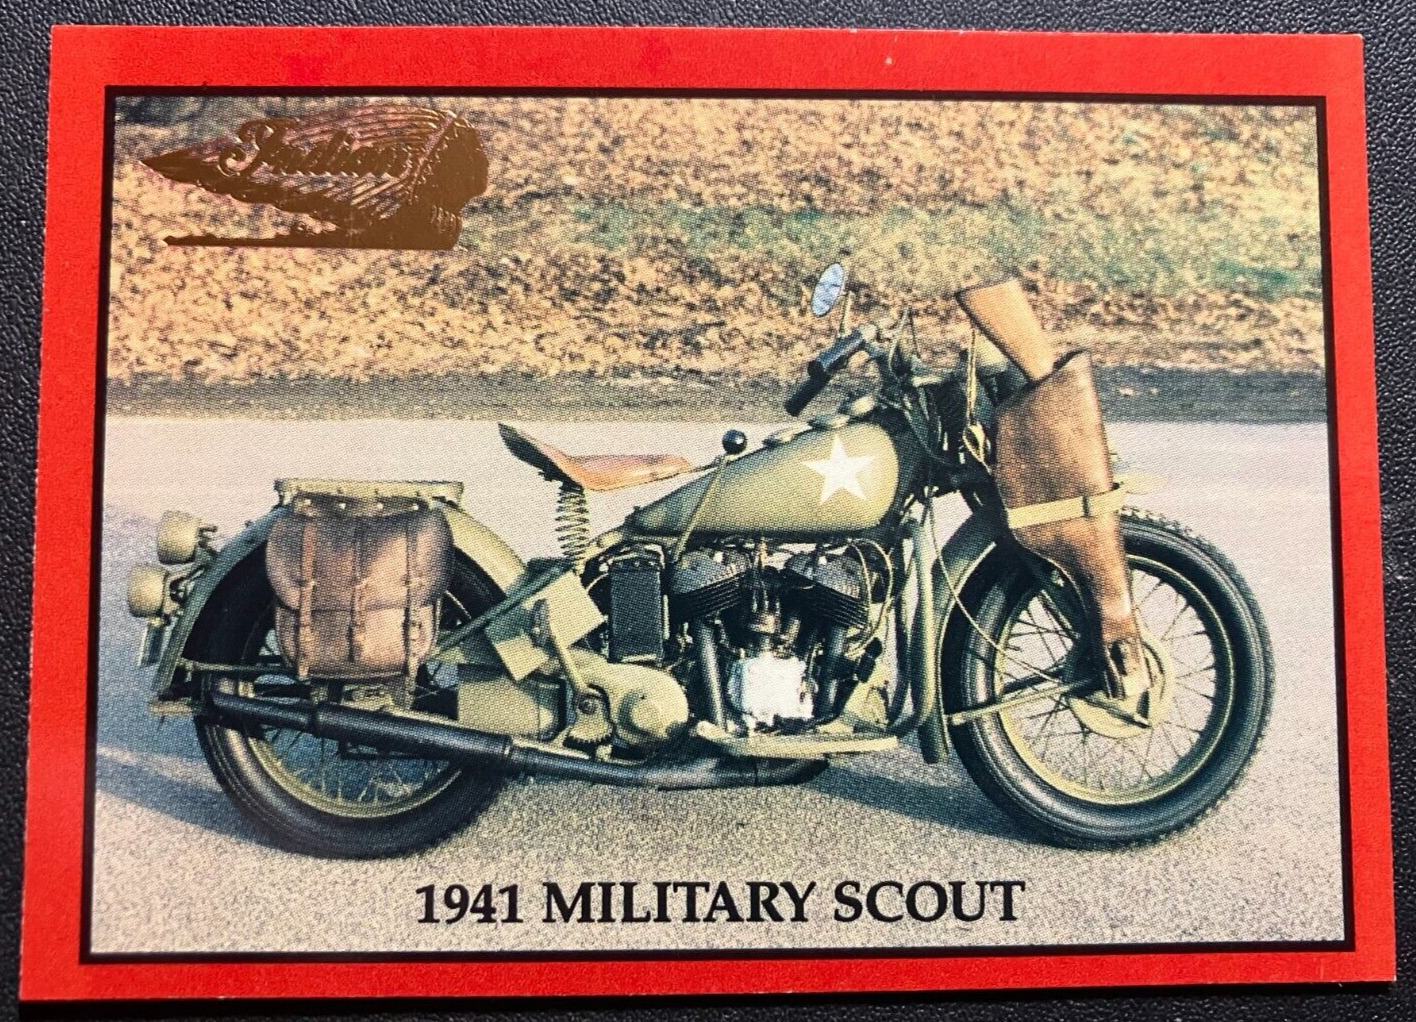 #18 1941 Military Scout Bike - Vintage Indian Motorcycles Series 2 Trading Card